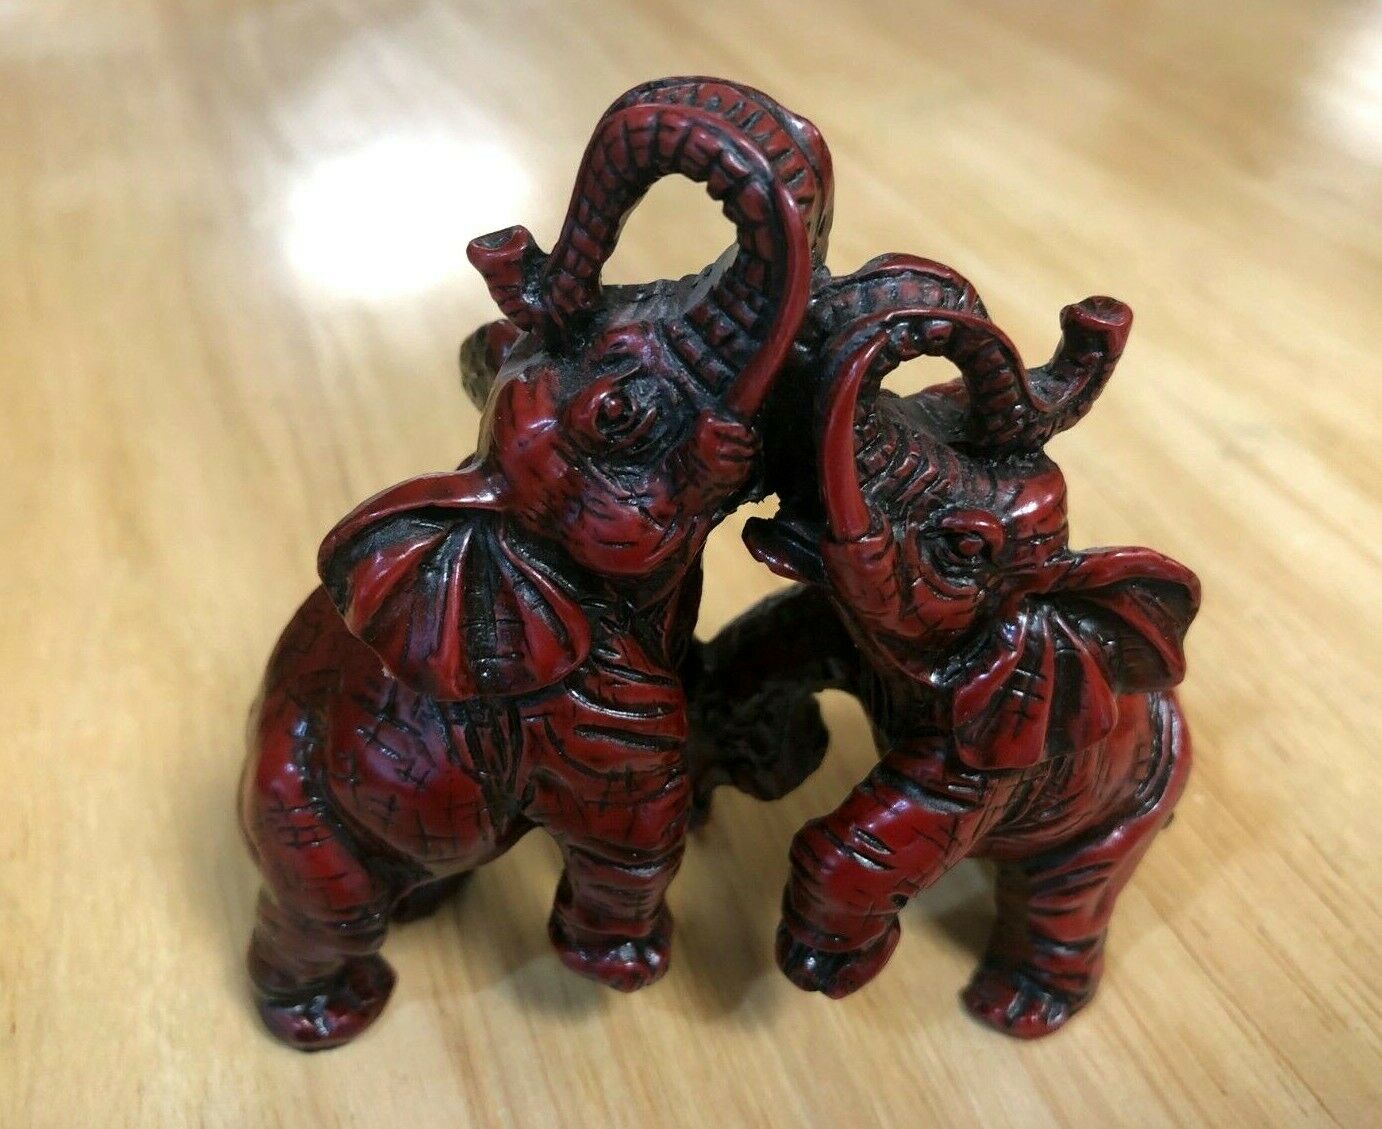 Elephants Statue Figurine 3.25" Tall - Deep Red Painted Polyresin - Ex Cond